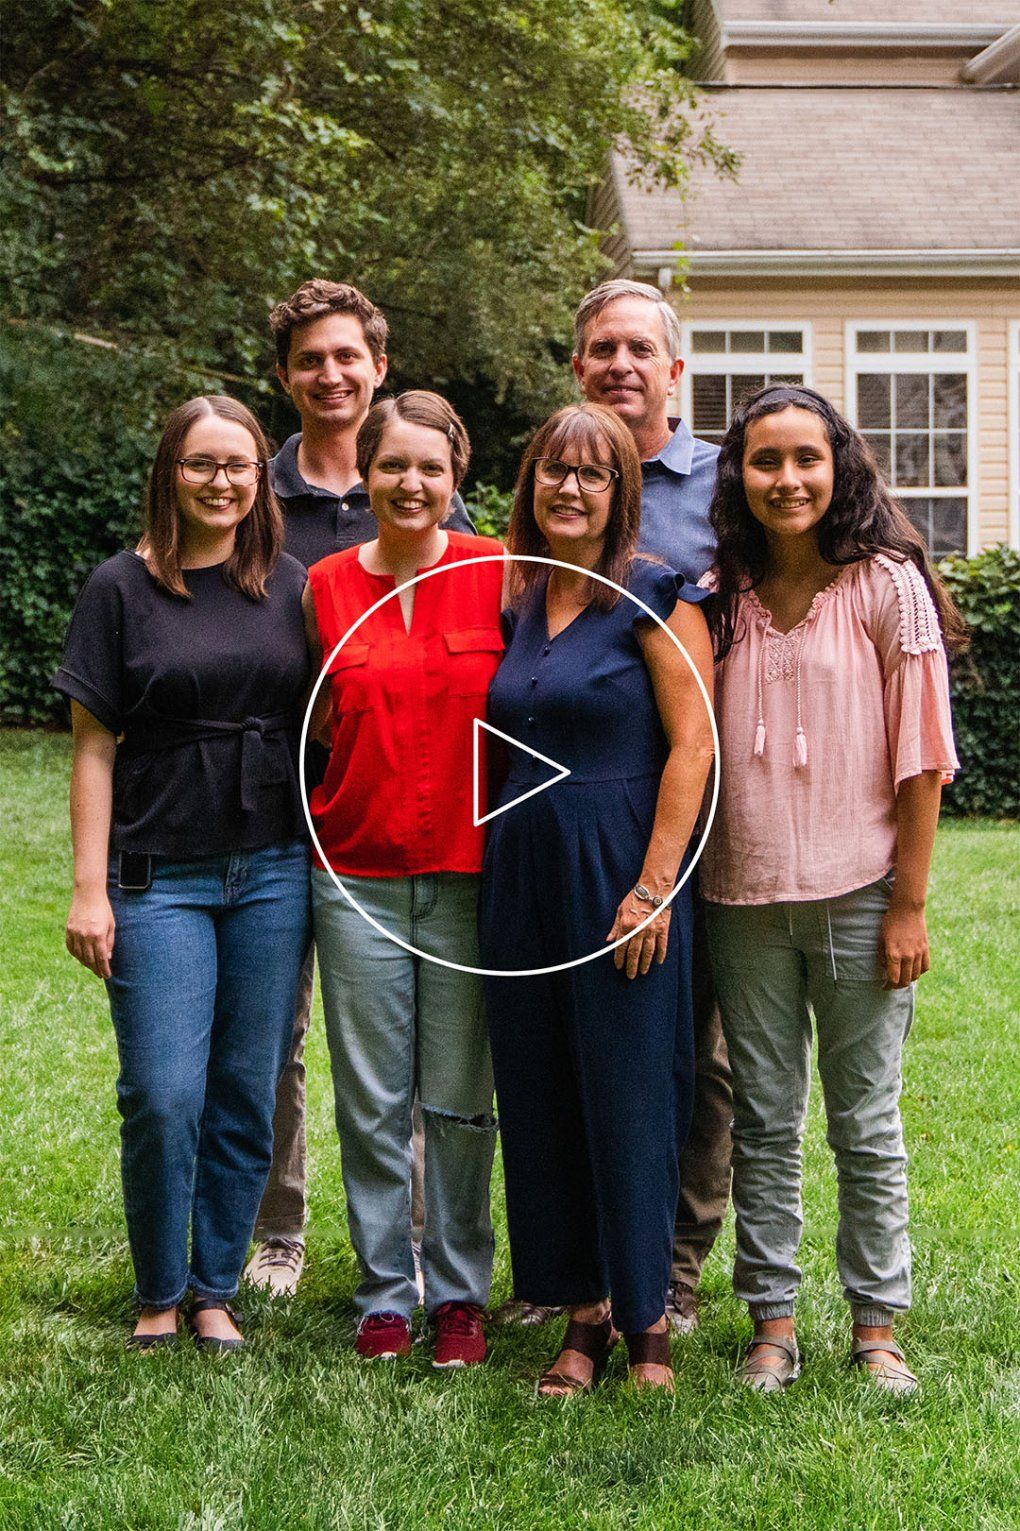 A family stands together on their lawn smiling at the camera with a play button overlayed